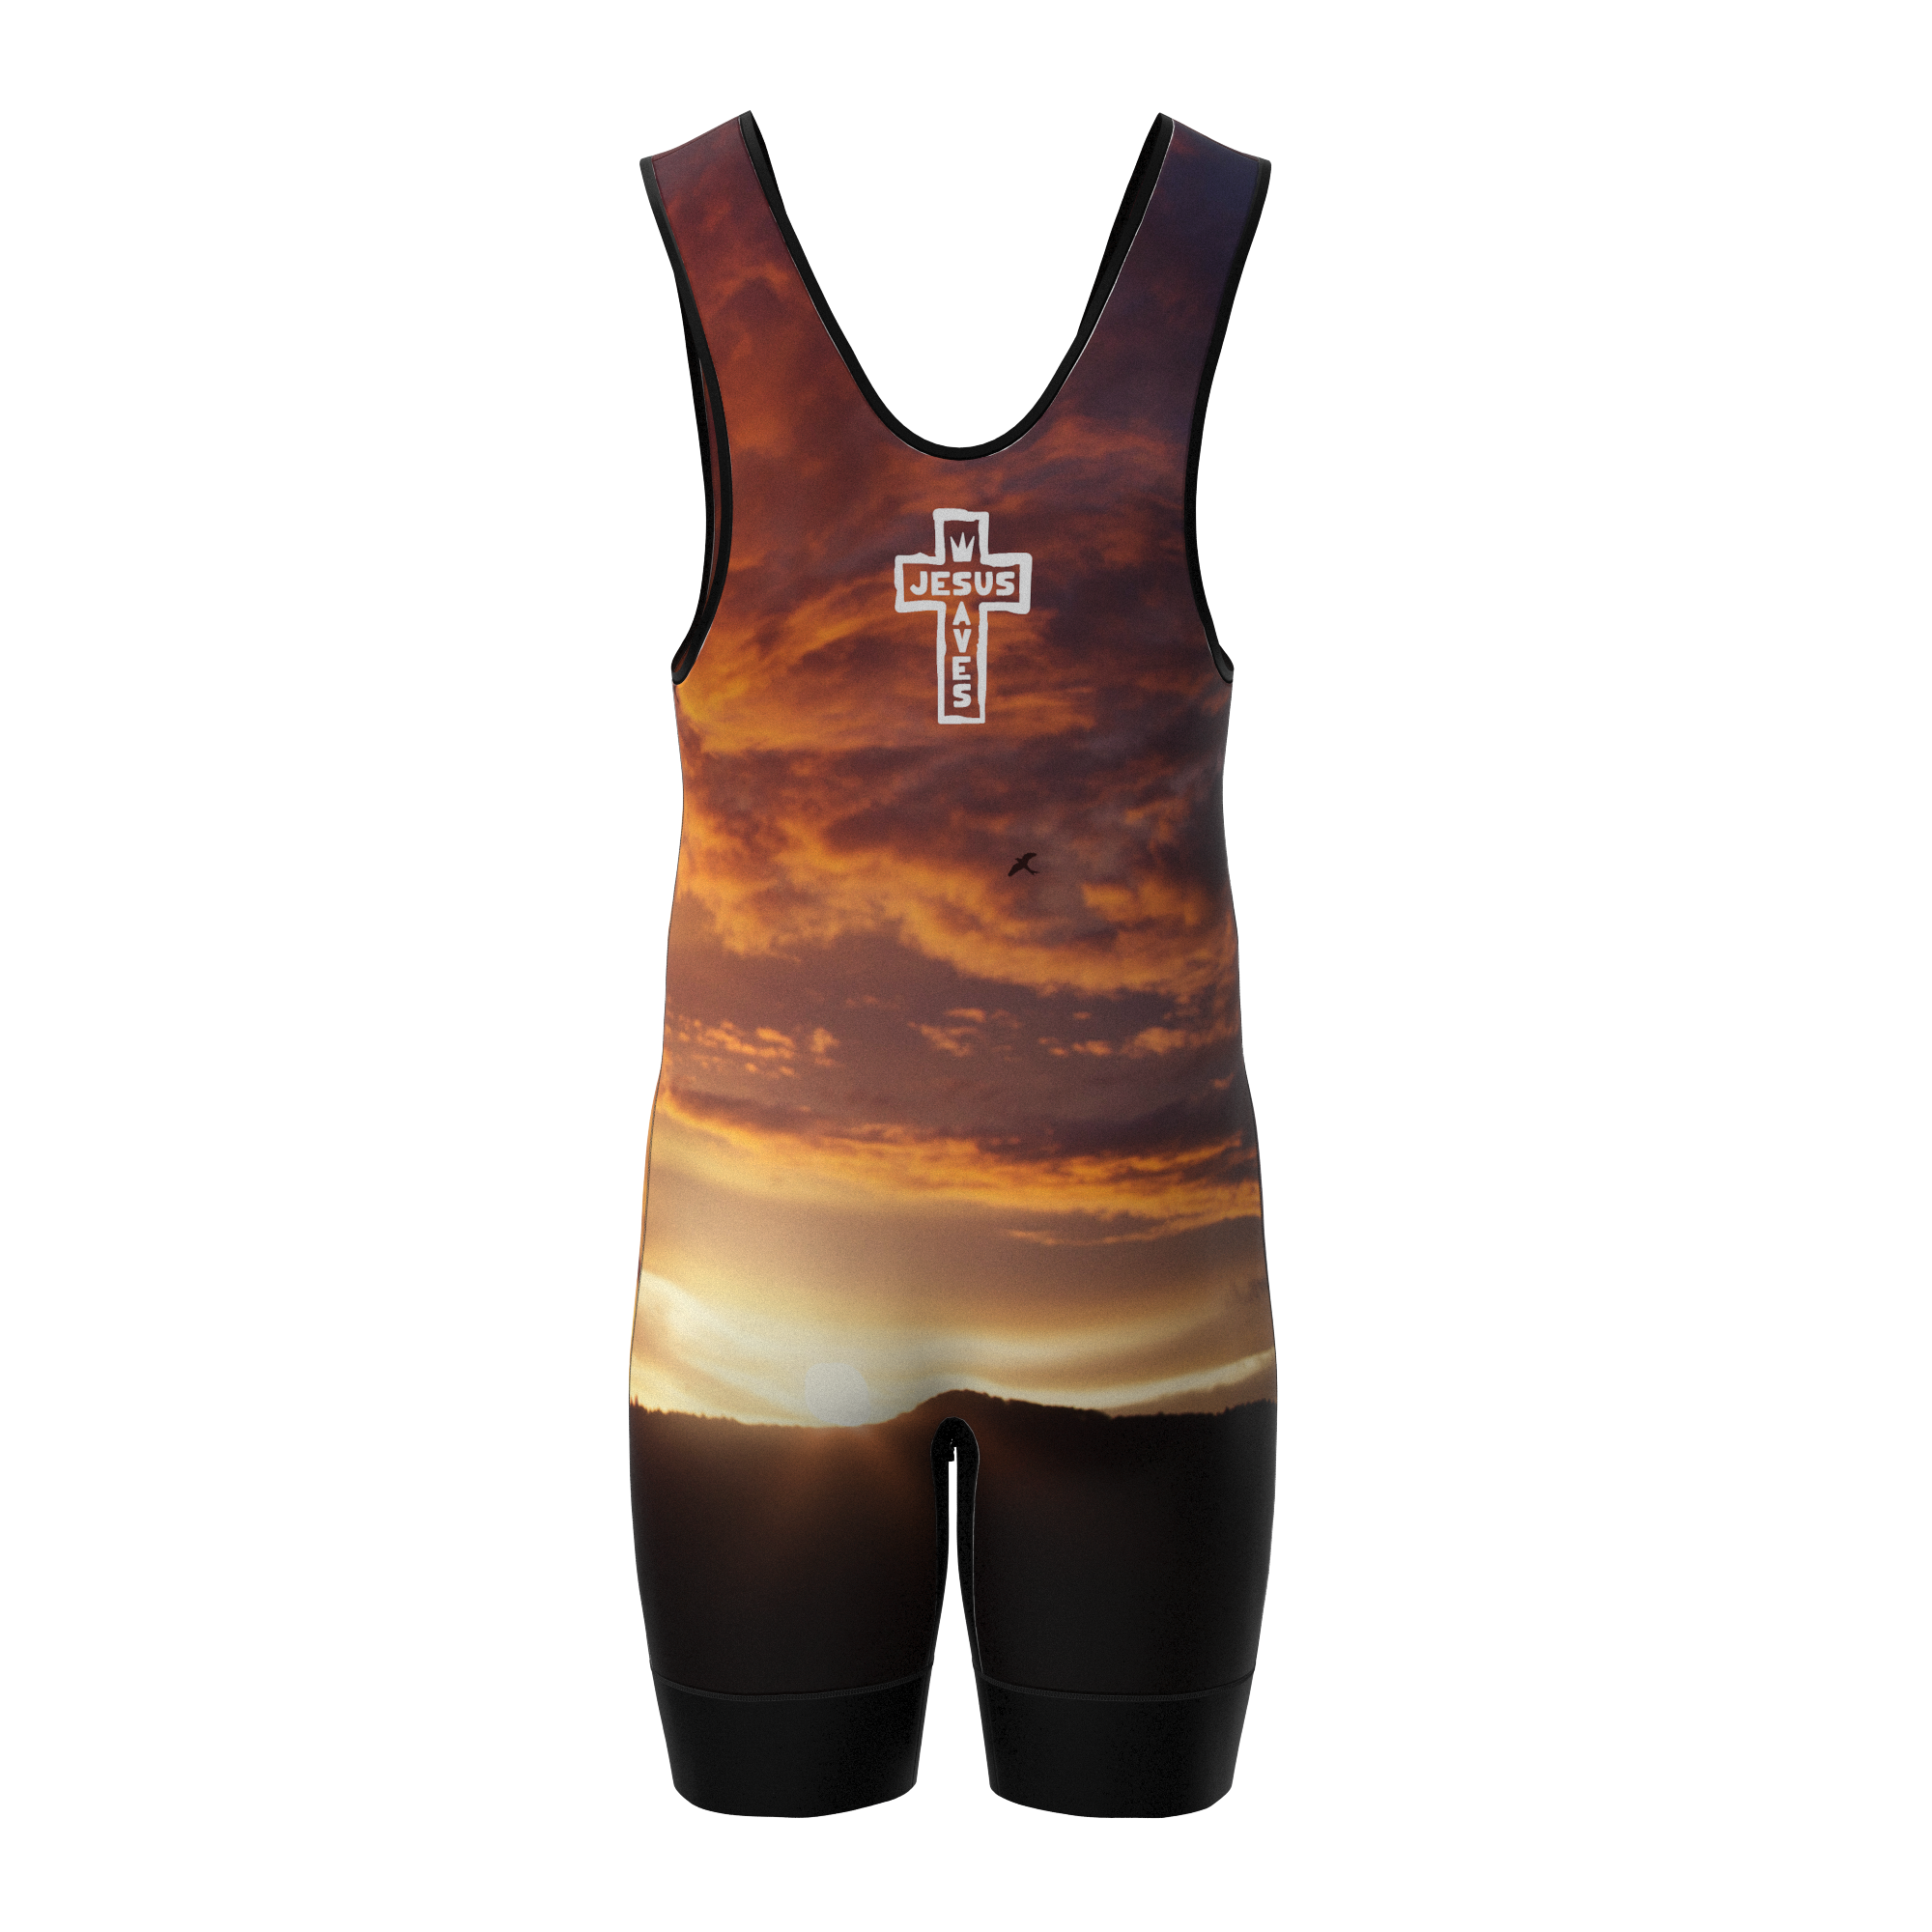 He Is Risen Fully Sublimated Wrestling Singlet Xtreme Pro Apparel